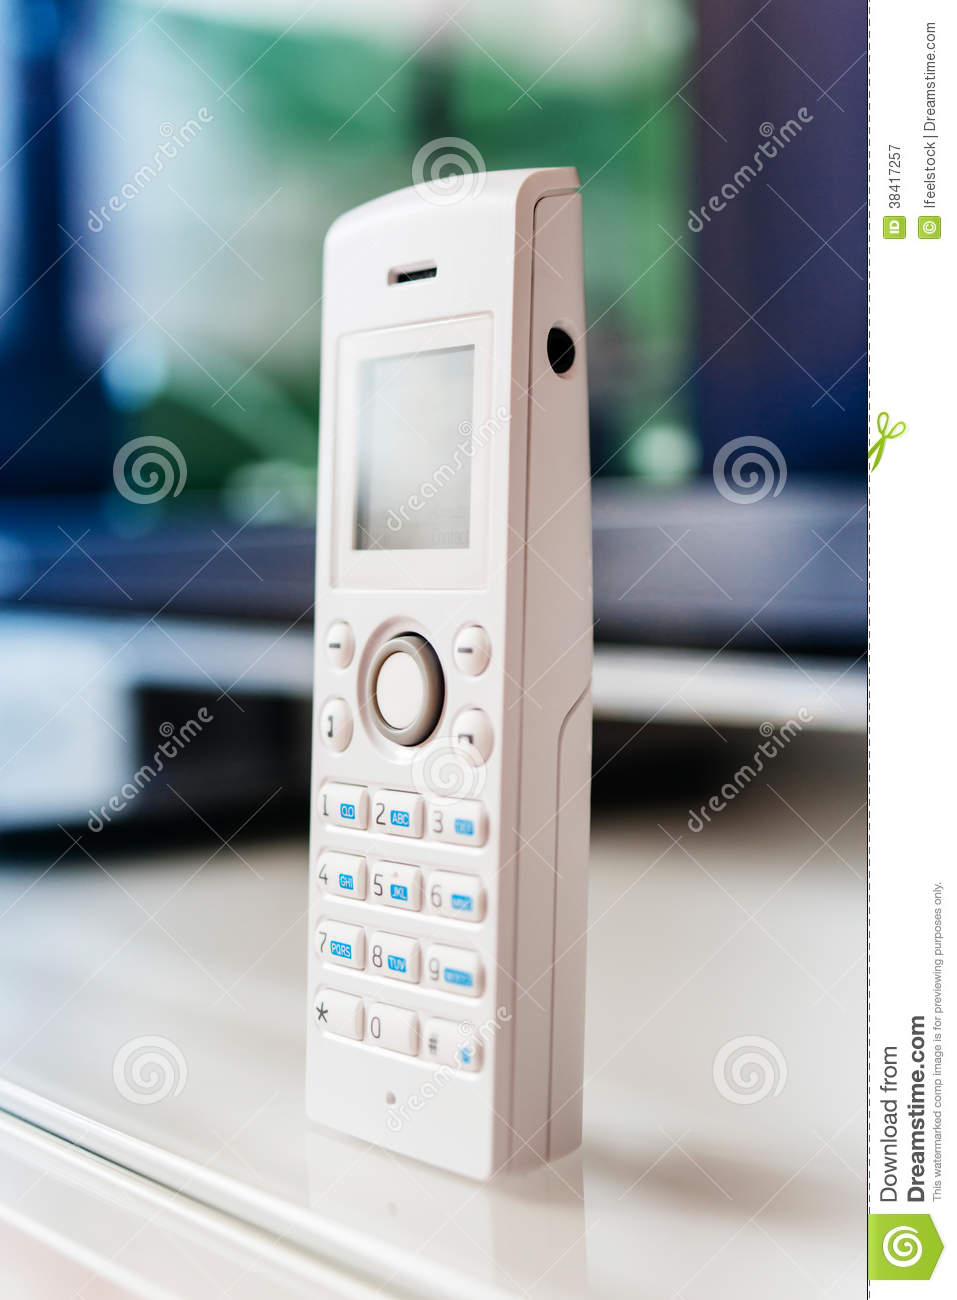 cordless phone office table stock dial white color large display tilt shift lens used accent center and the emphasize attention its small decorative lamps corner side entrance